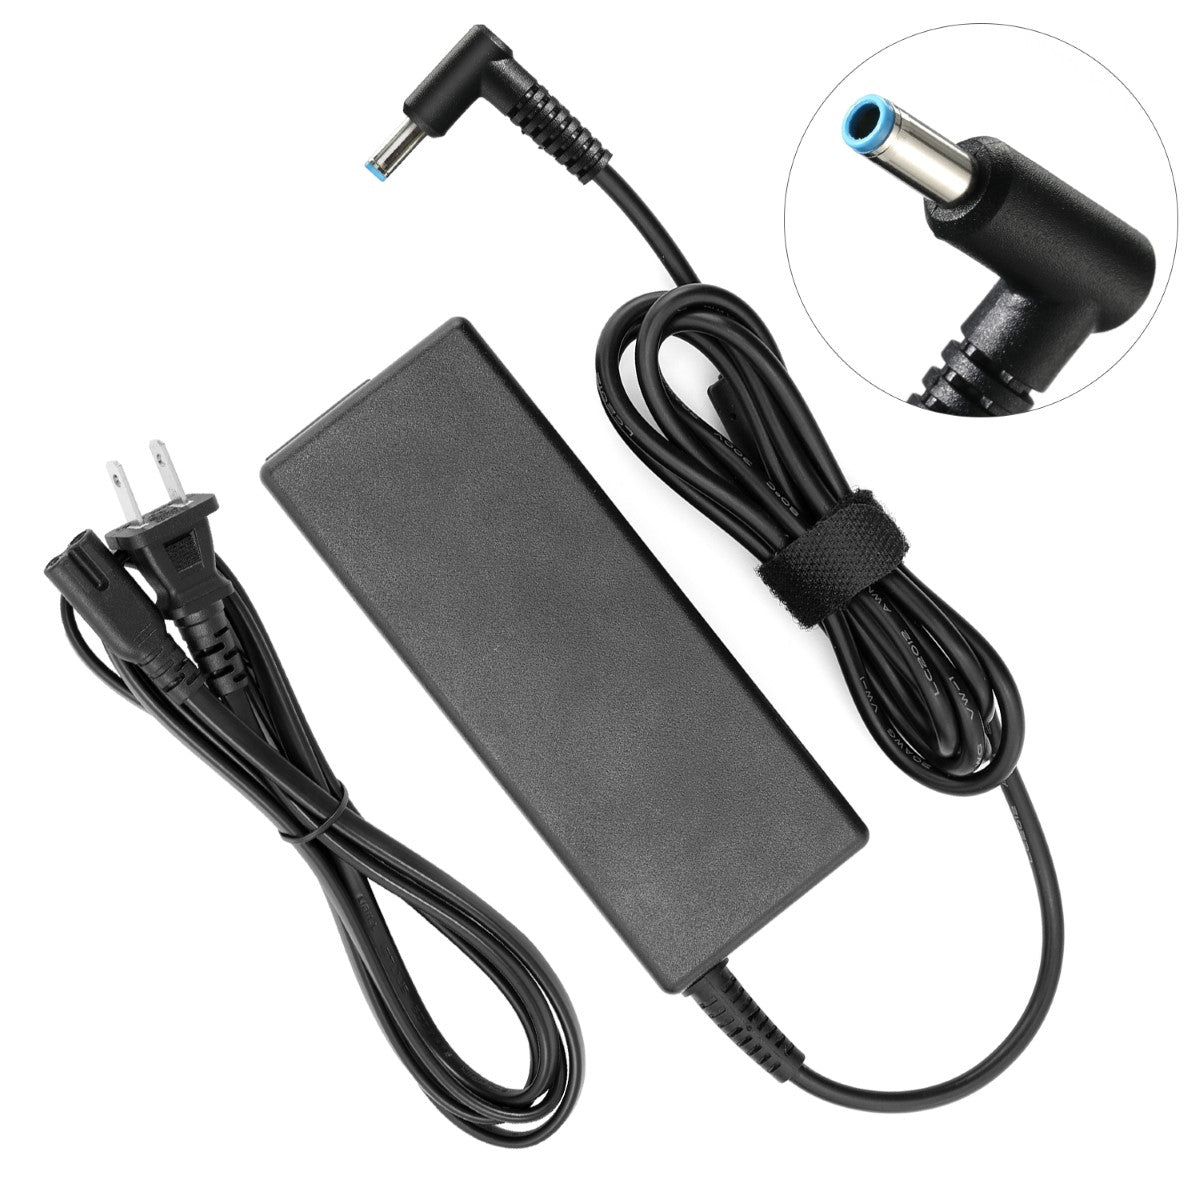 AC Adapter Charger for hp Envy Touchsmart 15-k167cl Notebook.